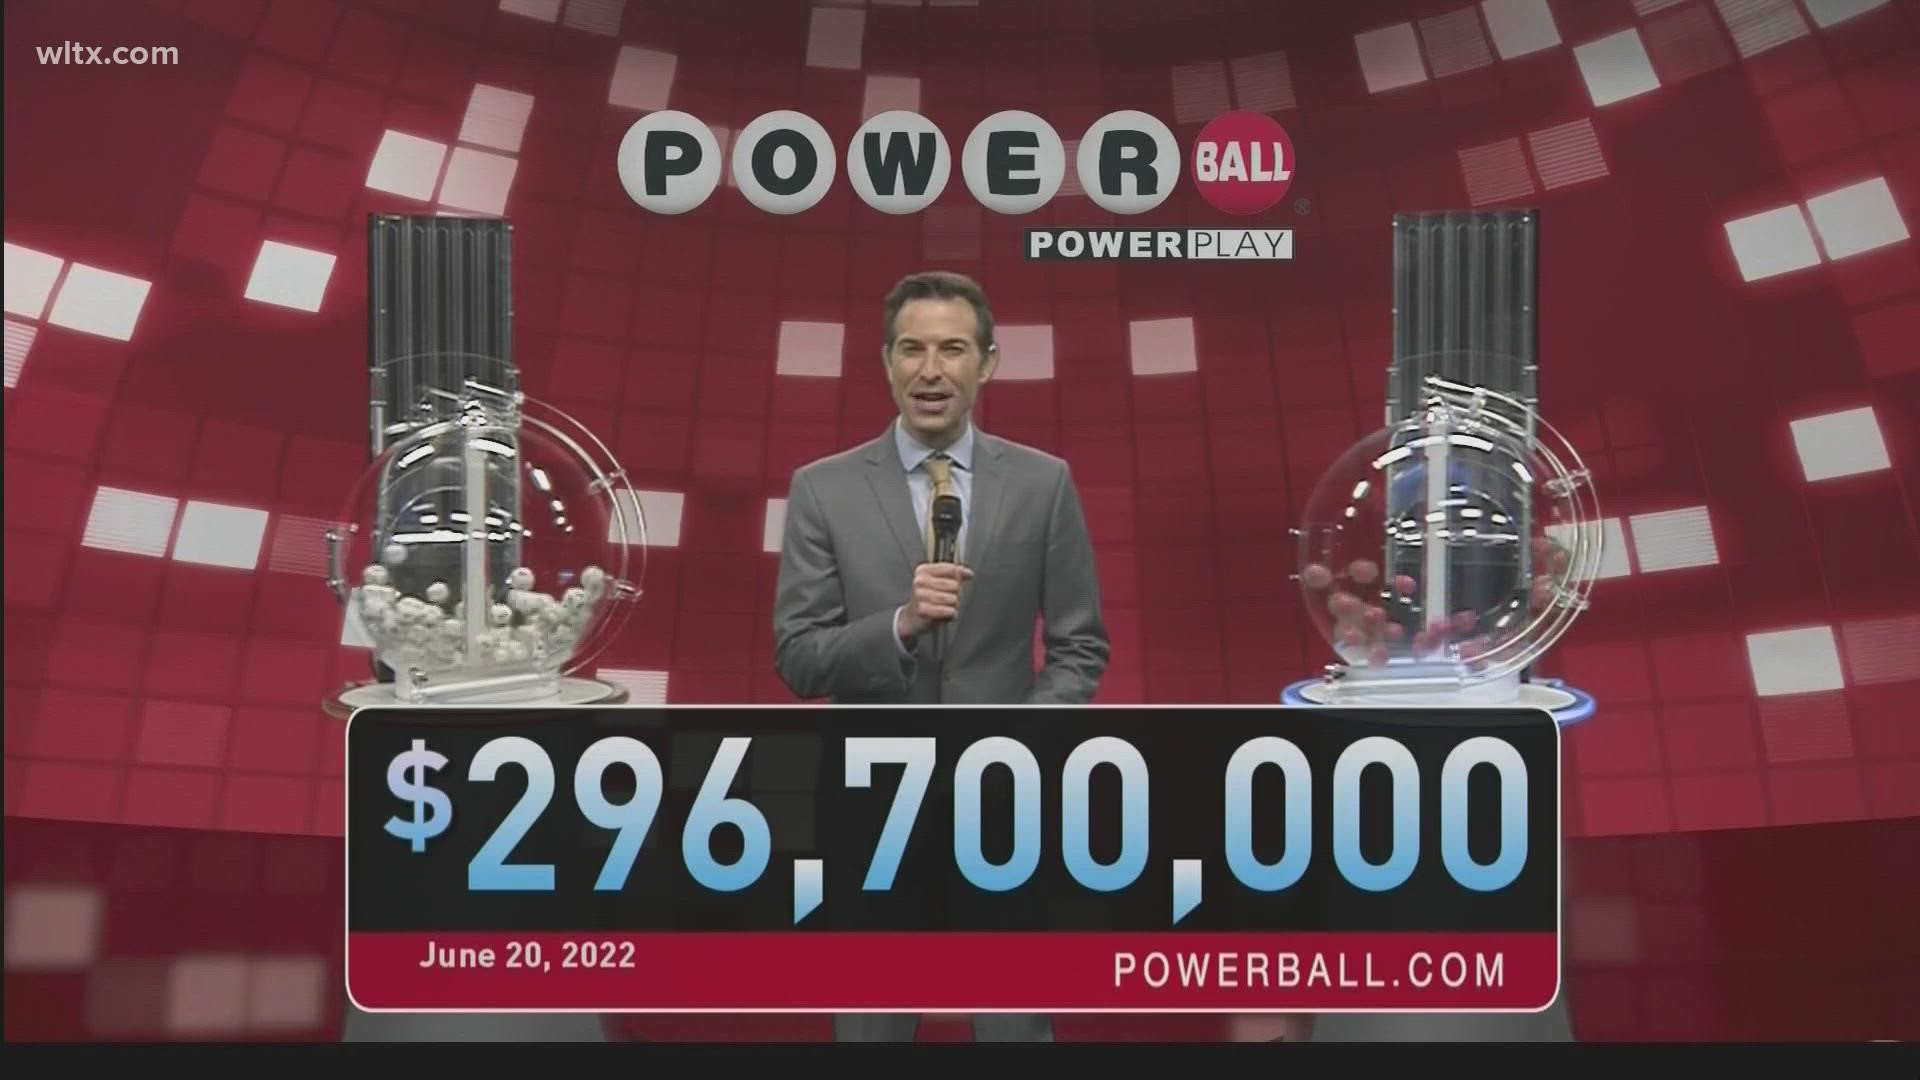 Here are the winning Powerball numbers for Monday, June 20, 2022.